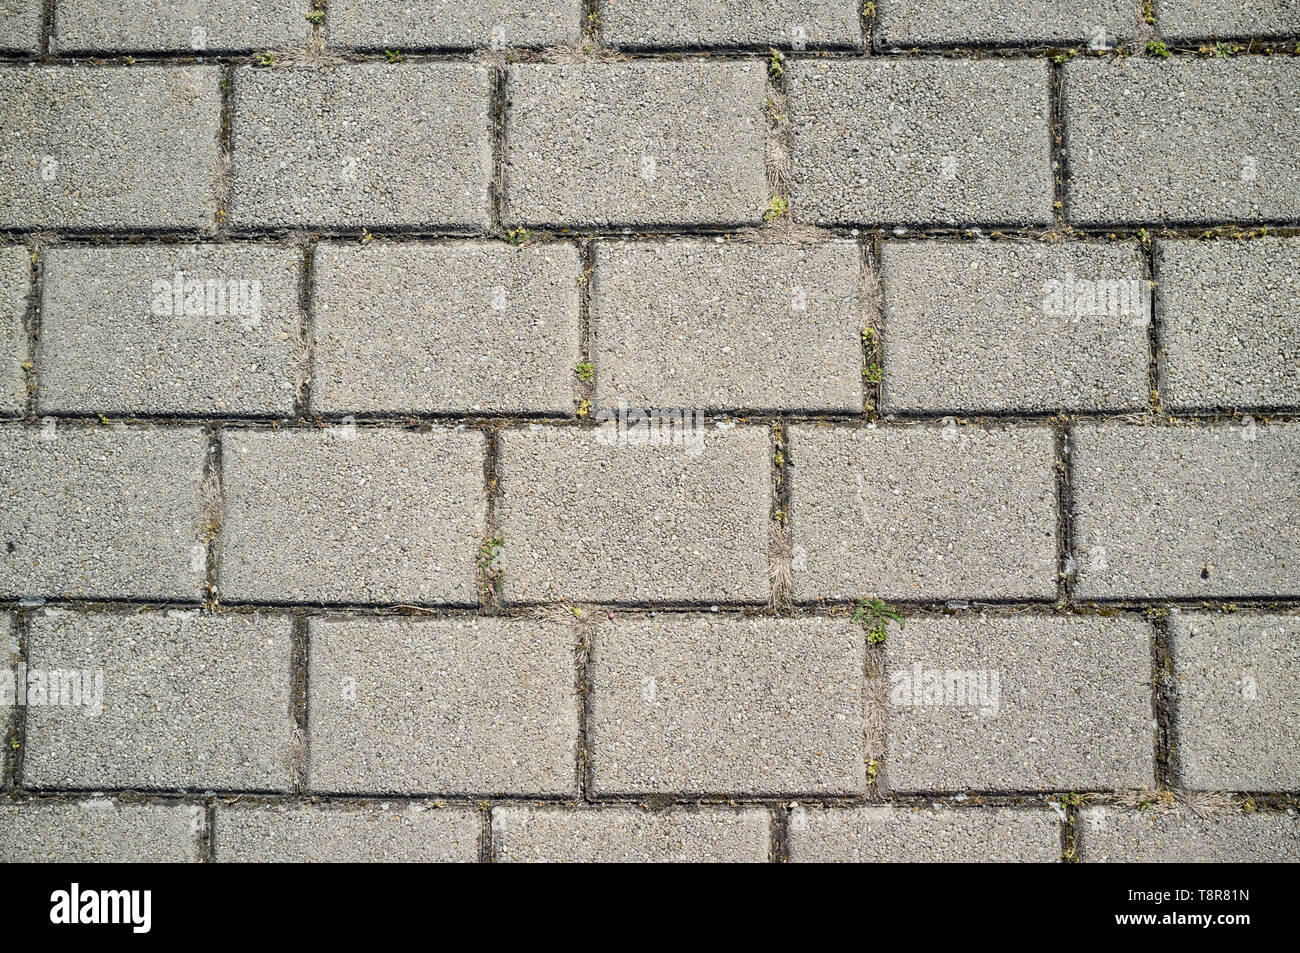 Texture of Concrete Paving Detail with Grass Growing from Cracks Stock Photo